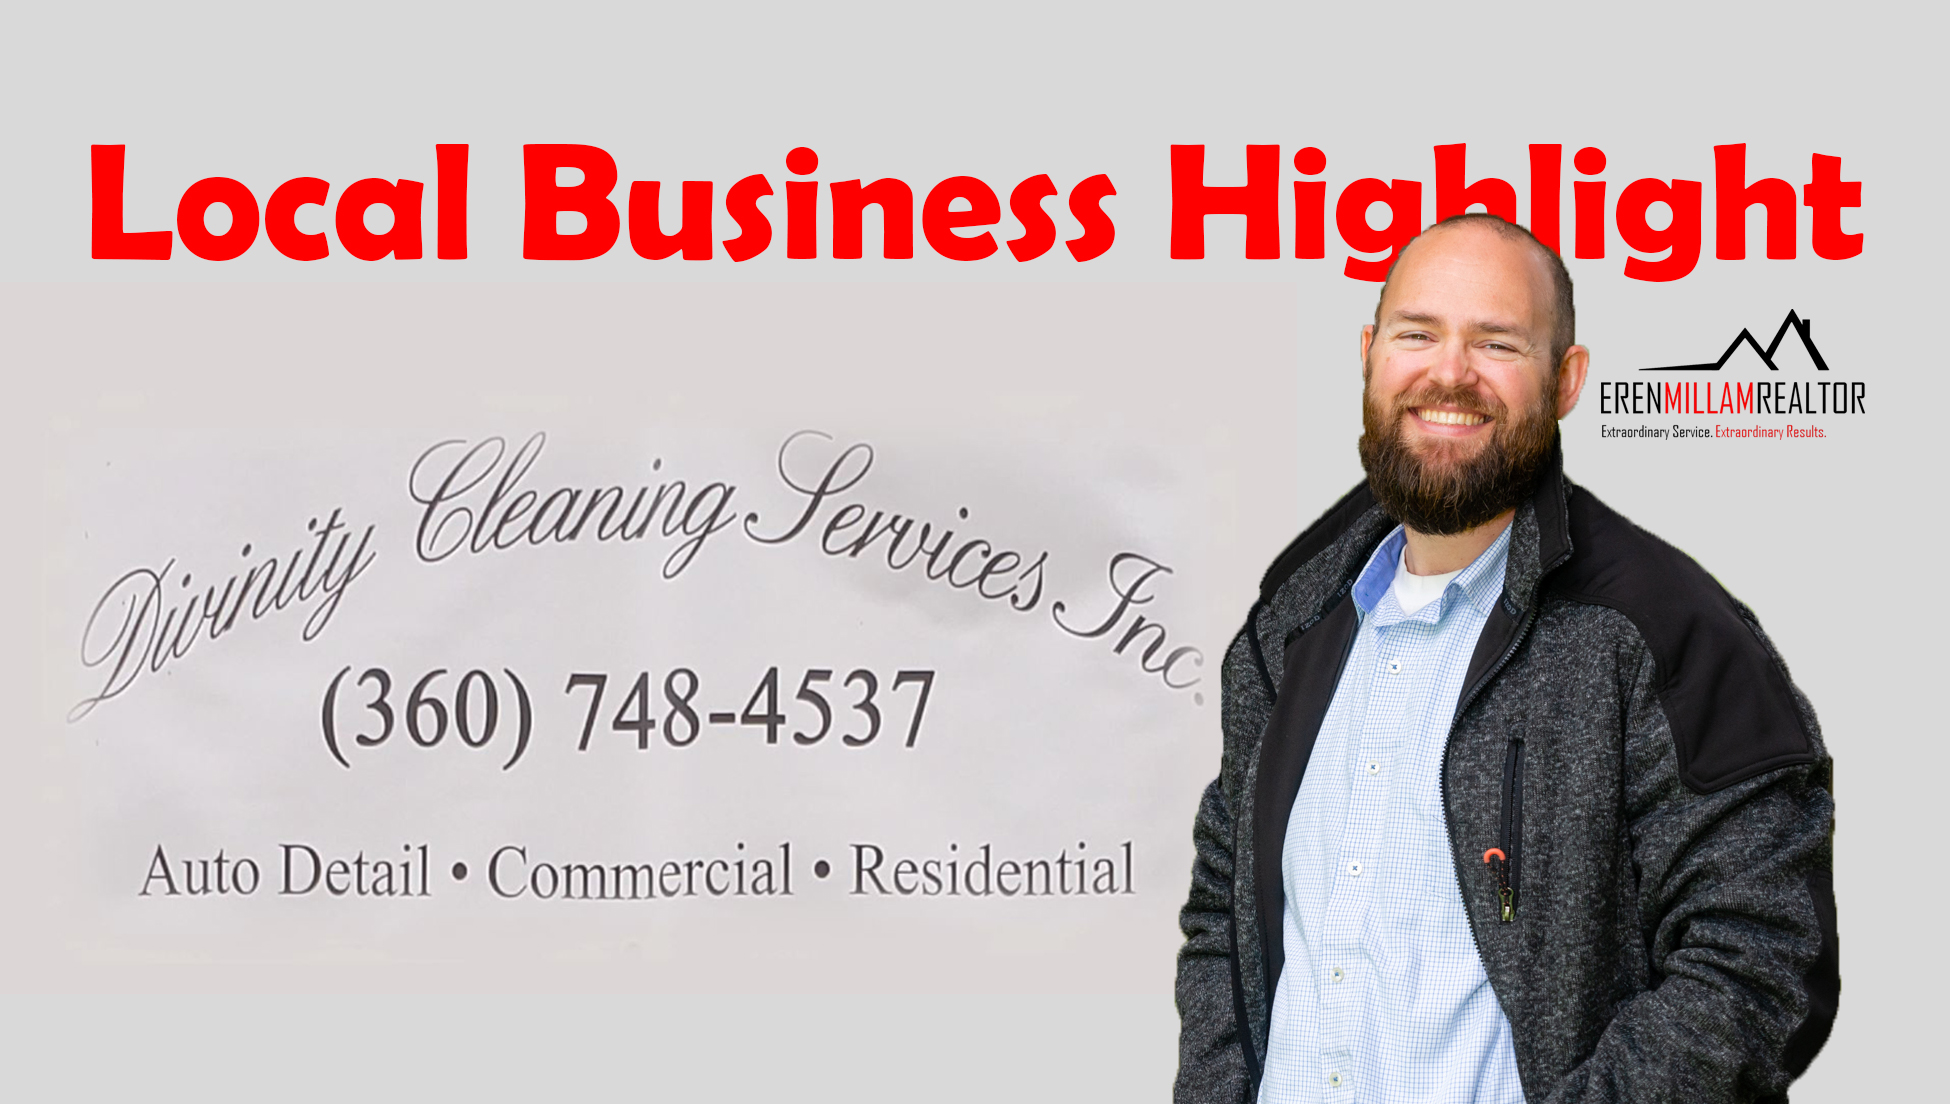 Business Highlight Divinity Cleaning Services